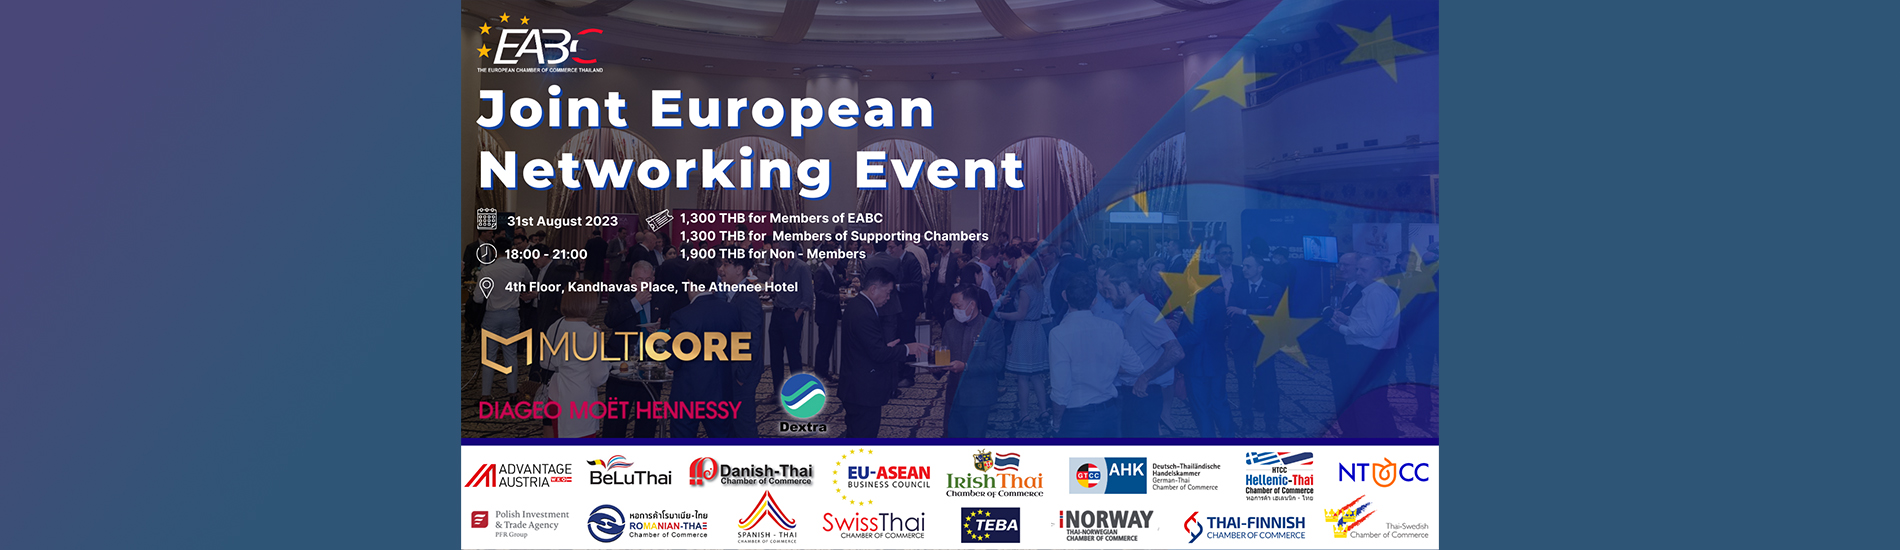 Joint European Networking Event